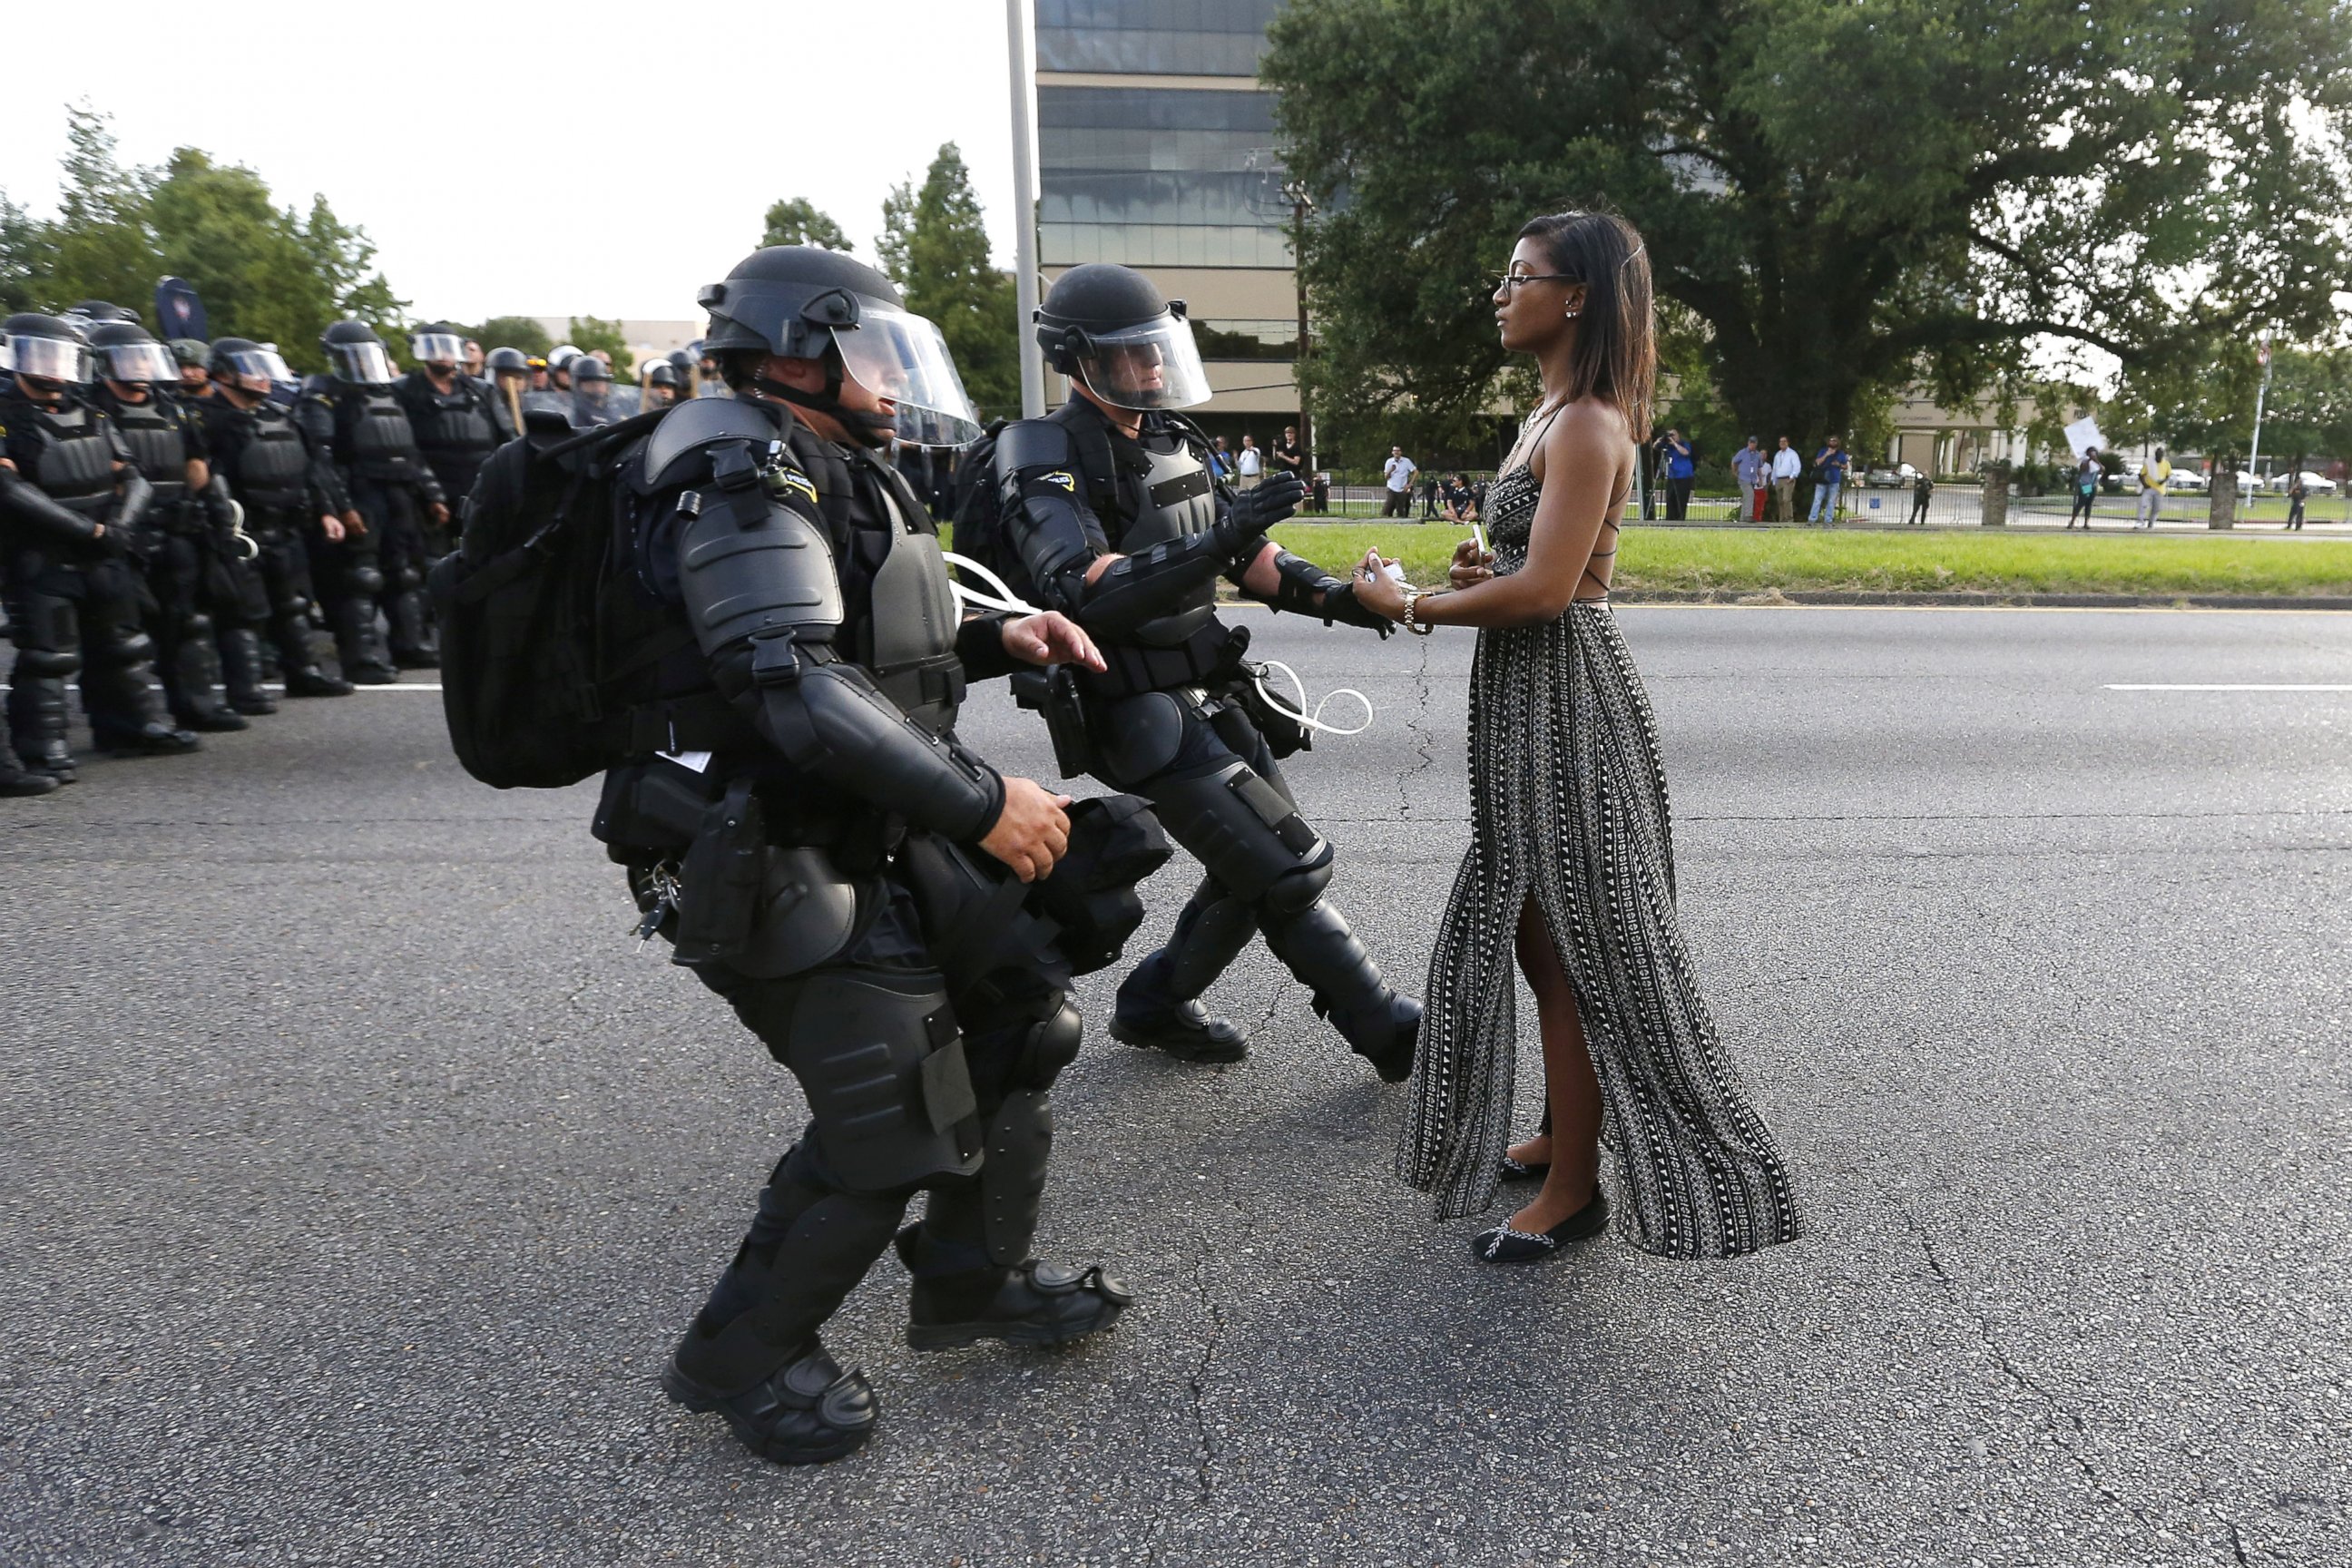 PHOTO: A demonstrator protesting the shooting death of Alton Sterling is detained by law enforcement near the headquarters of the Baton Rouge Police Department in Baton Rouge, Louisiana, July 9, 2016.